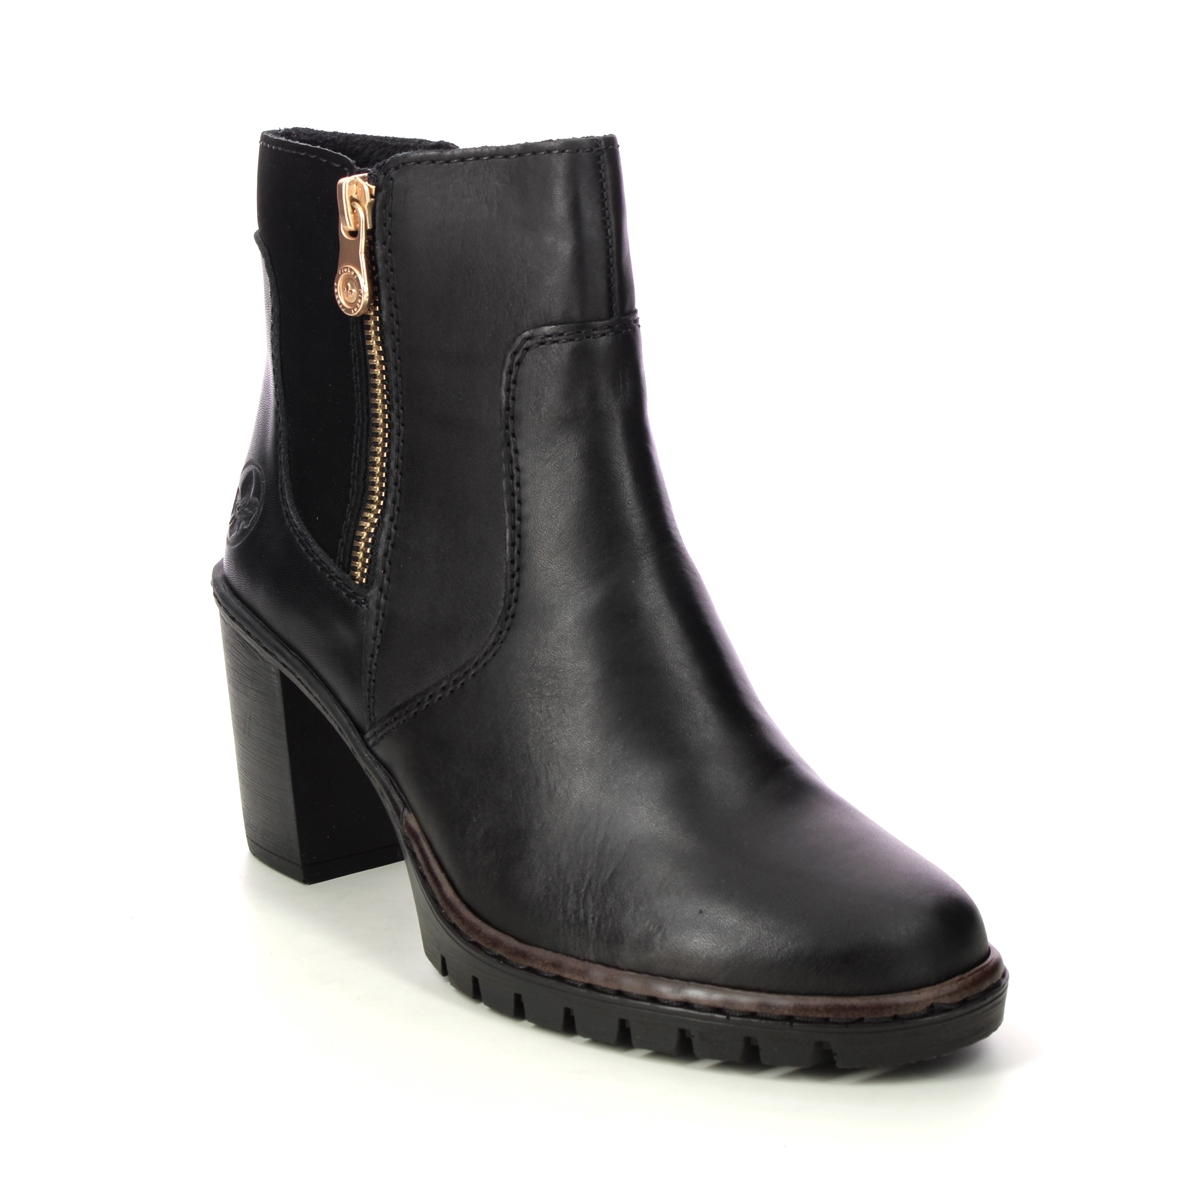 Rieker Vonntu Black Leather Womens Ankle Boots Y2557-00 In Size 40 In Plain Black Leather